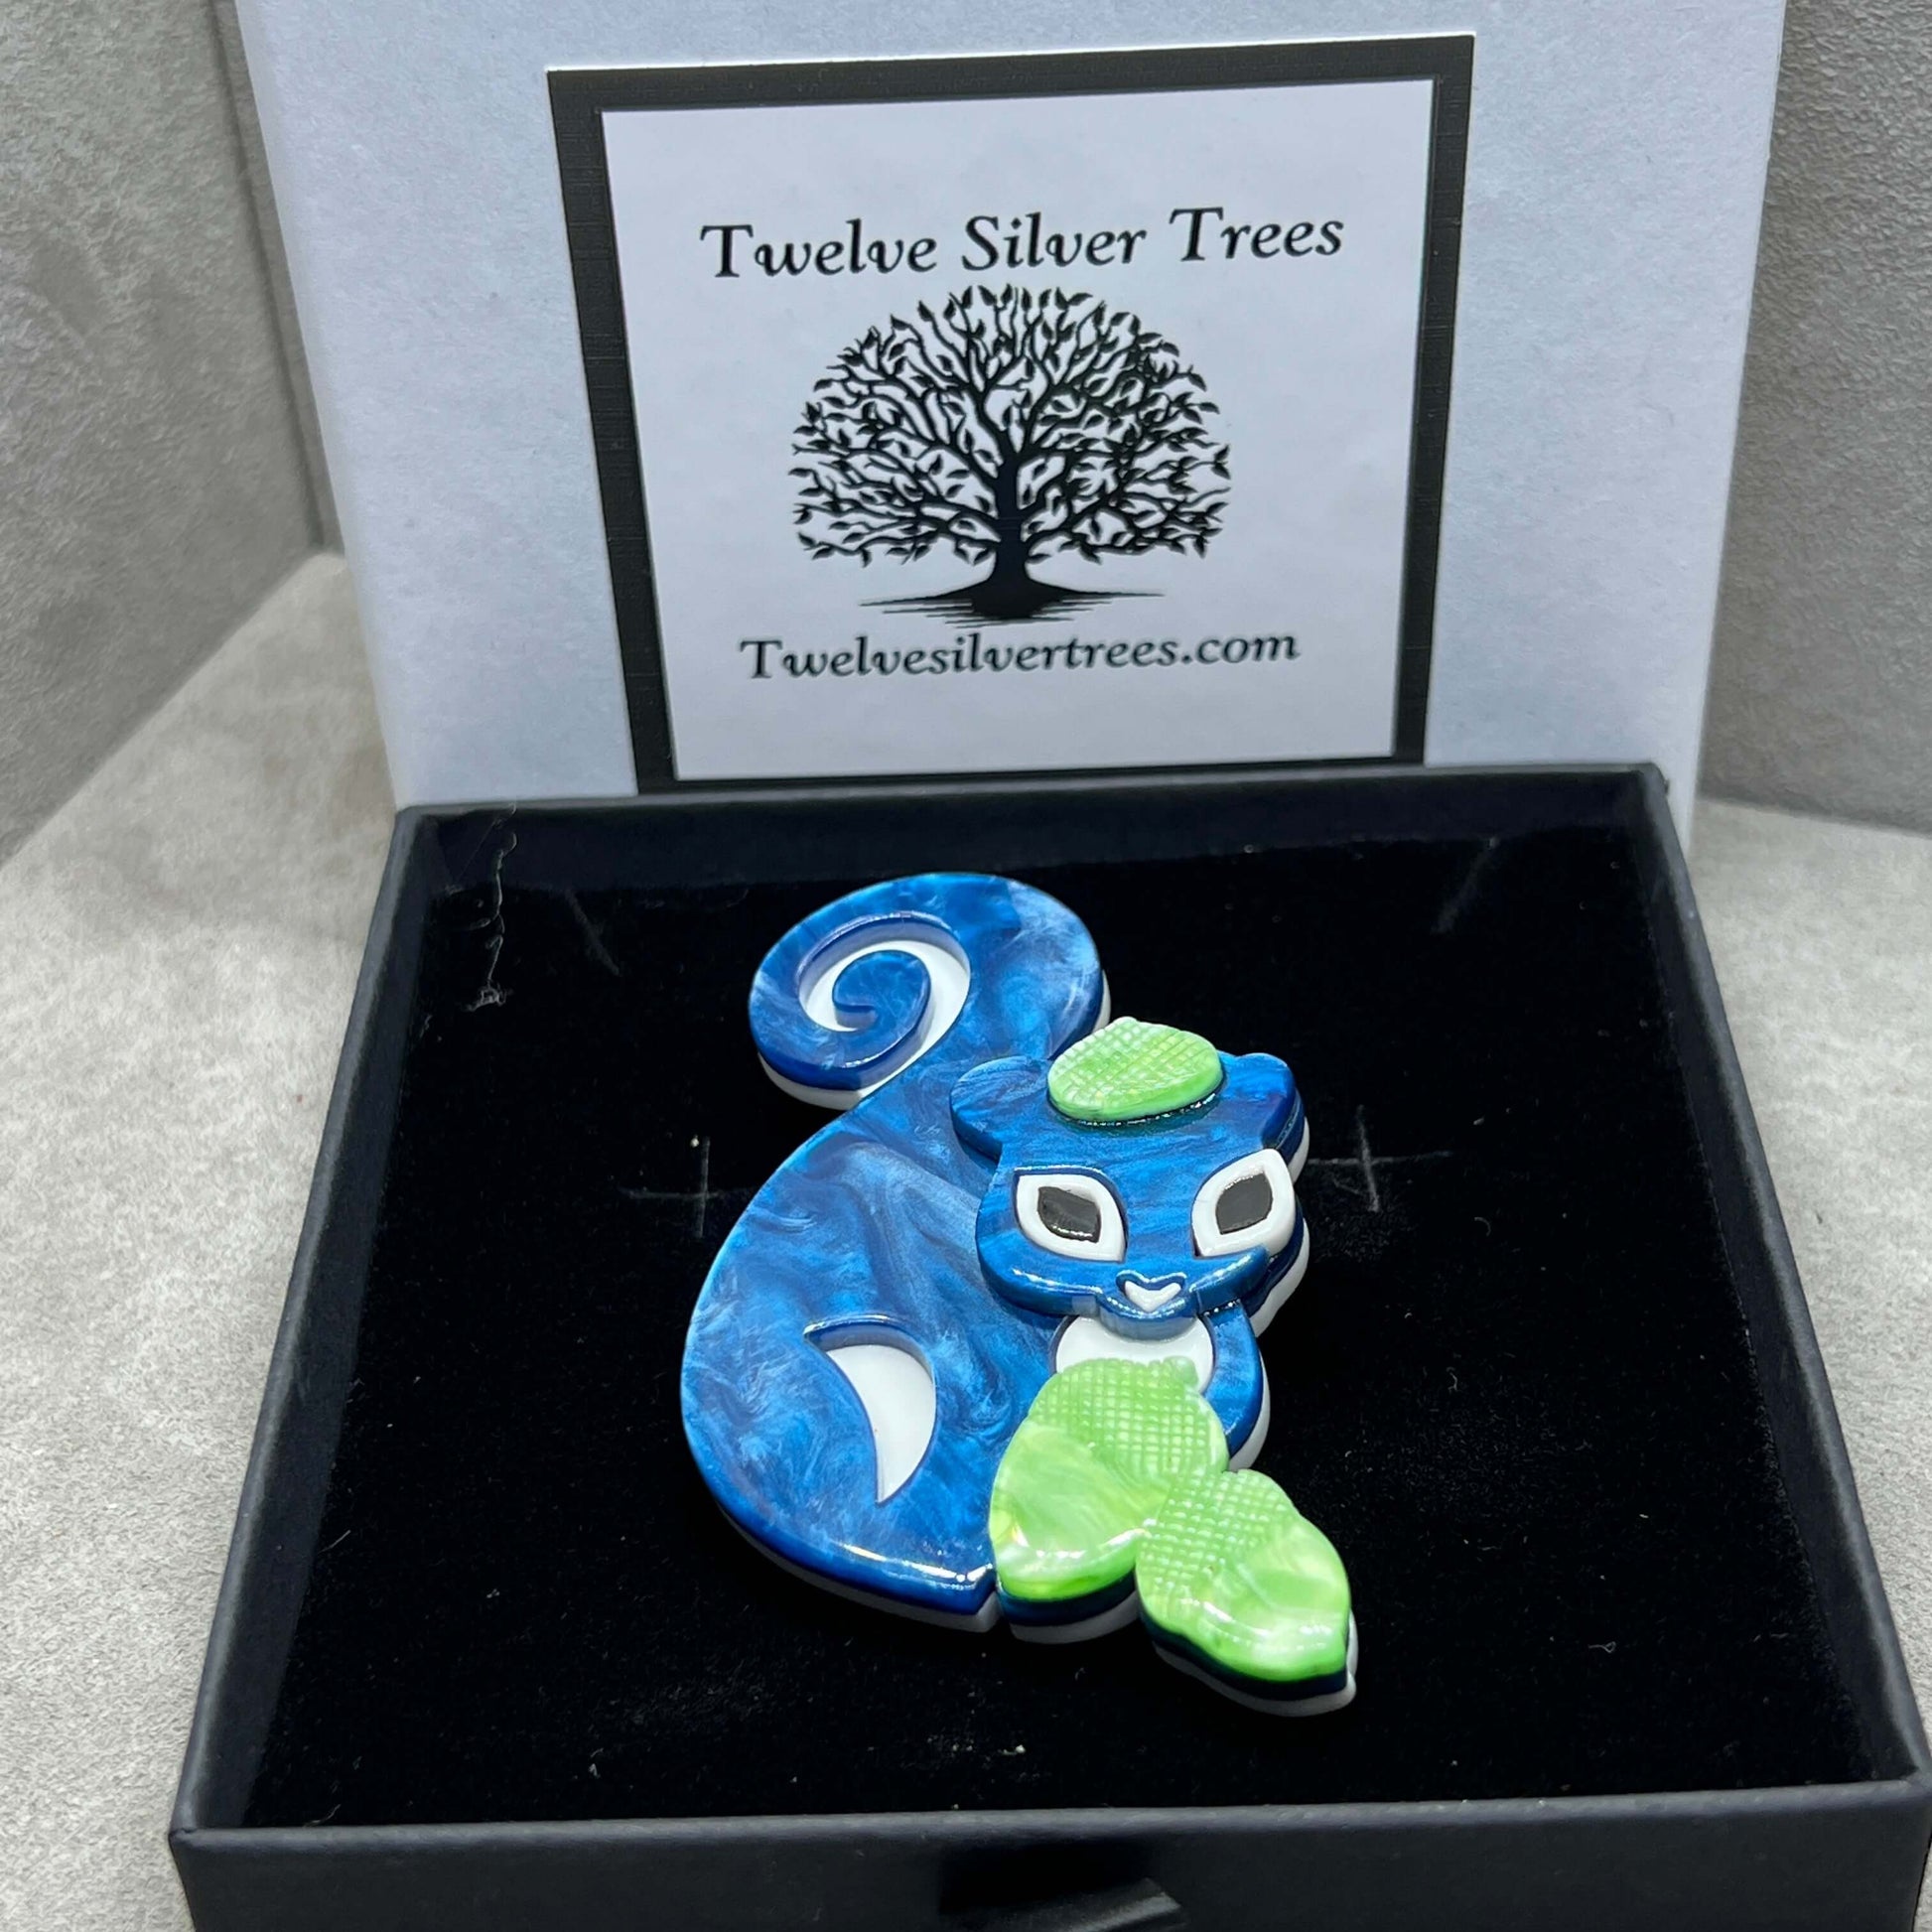 Handmade Acrylic Art Brooch - “Nuts About You” Blue Squirrel - Twelve Silver Trees